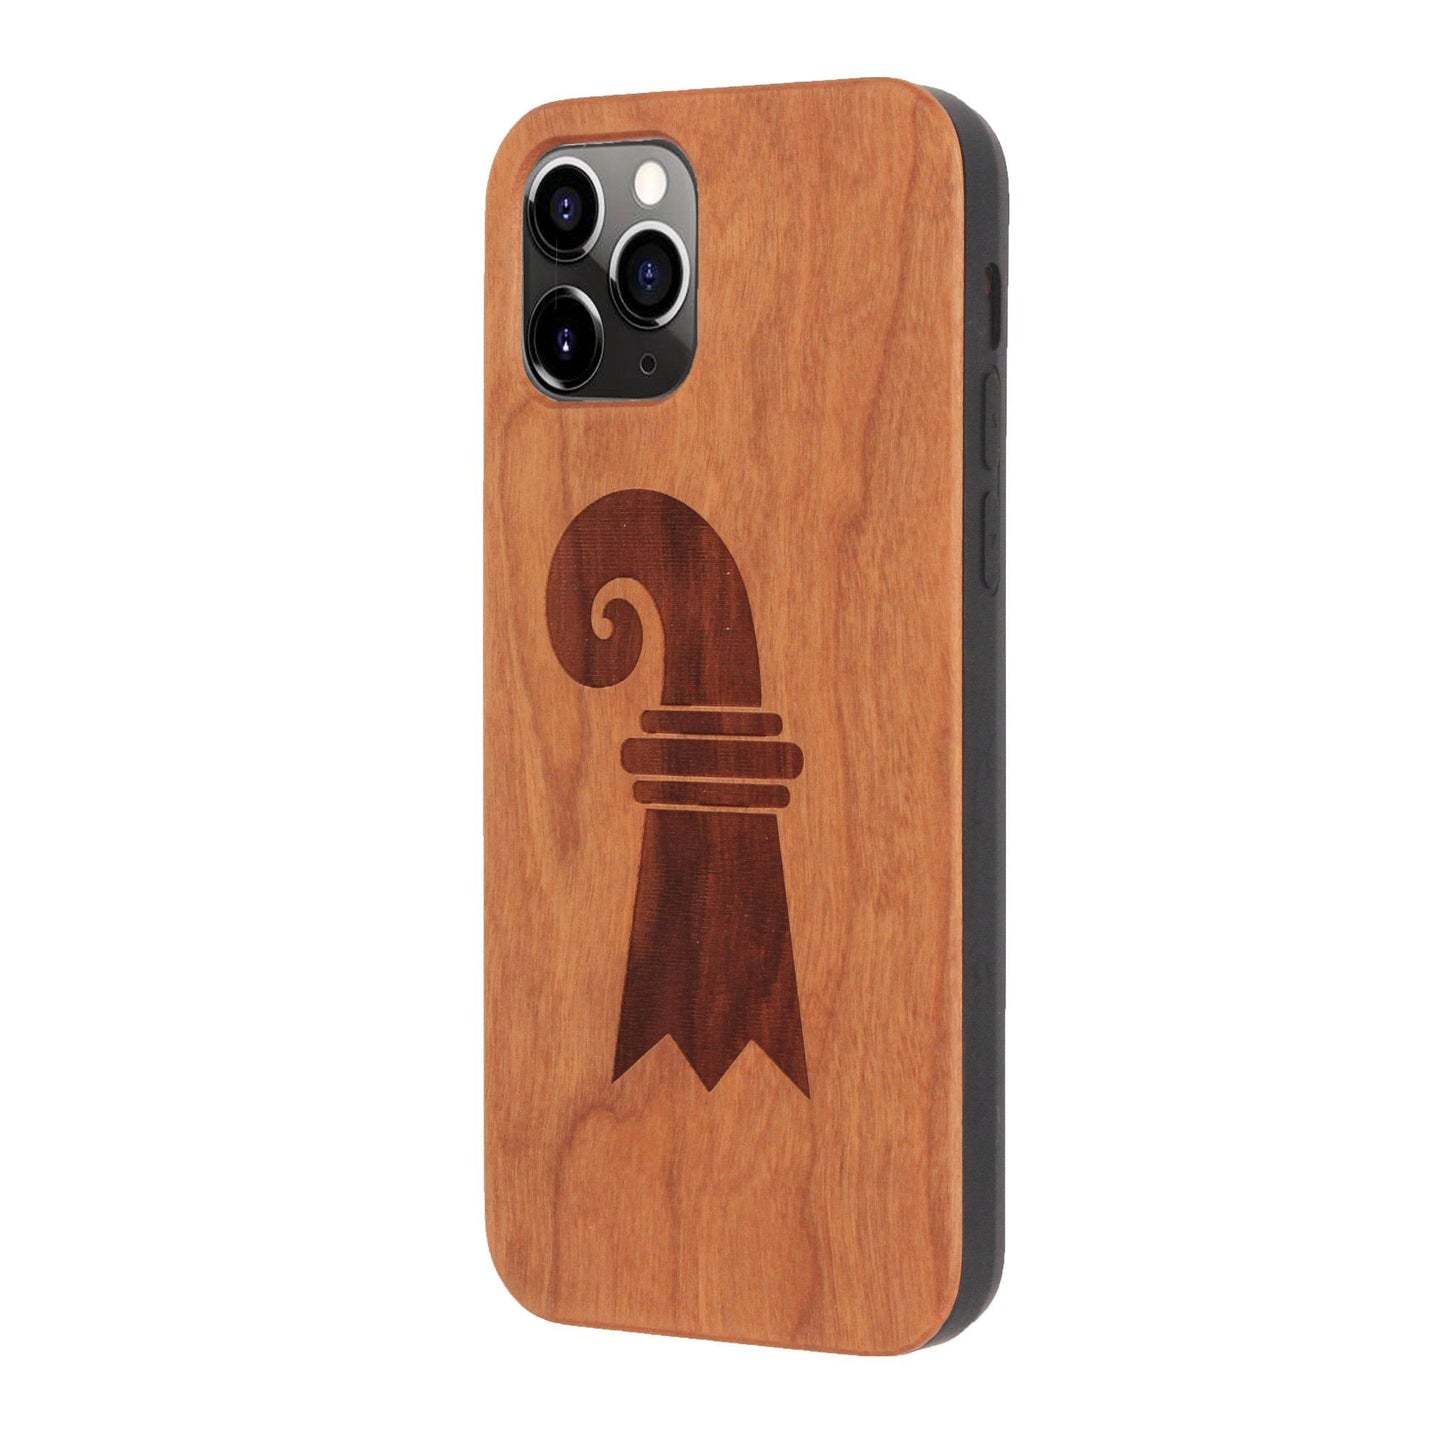 Baslerstab Eden case made of cherry wood for iPhone 11 Pro Max